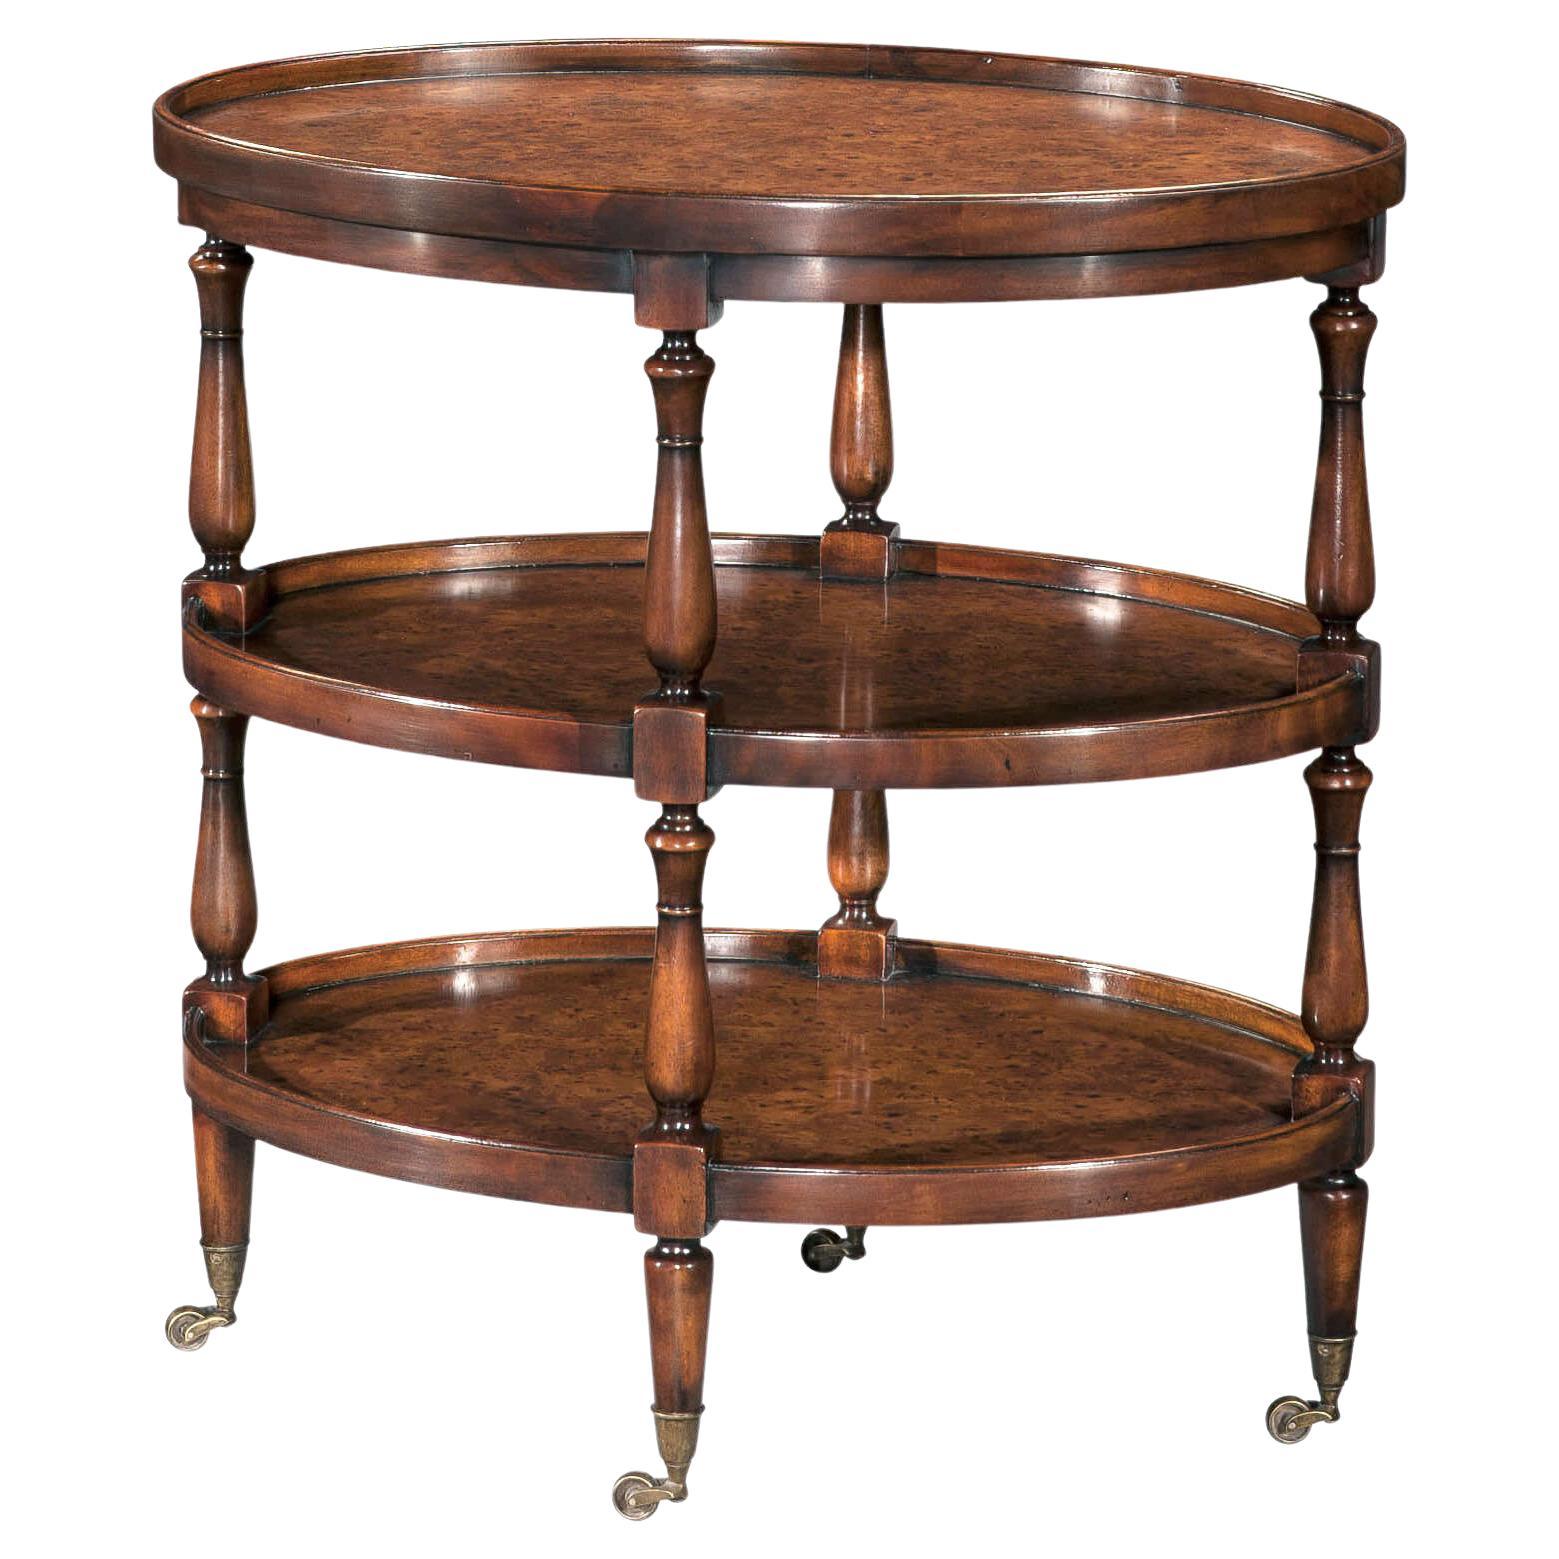 Three Tier Oval End Table